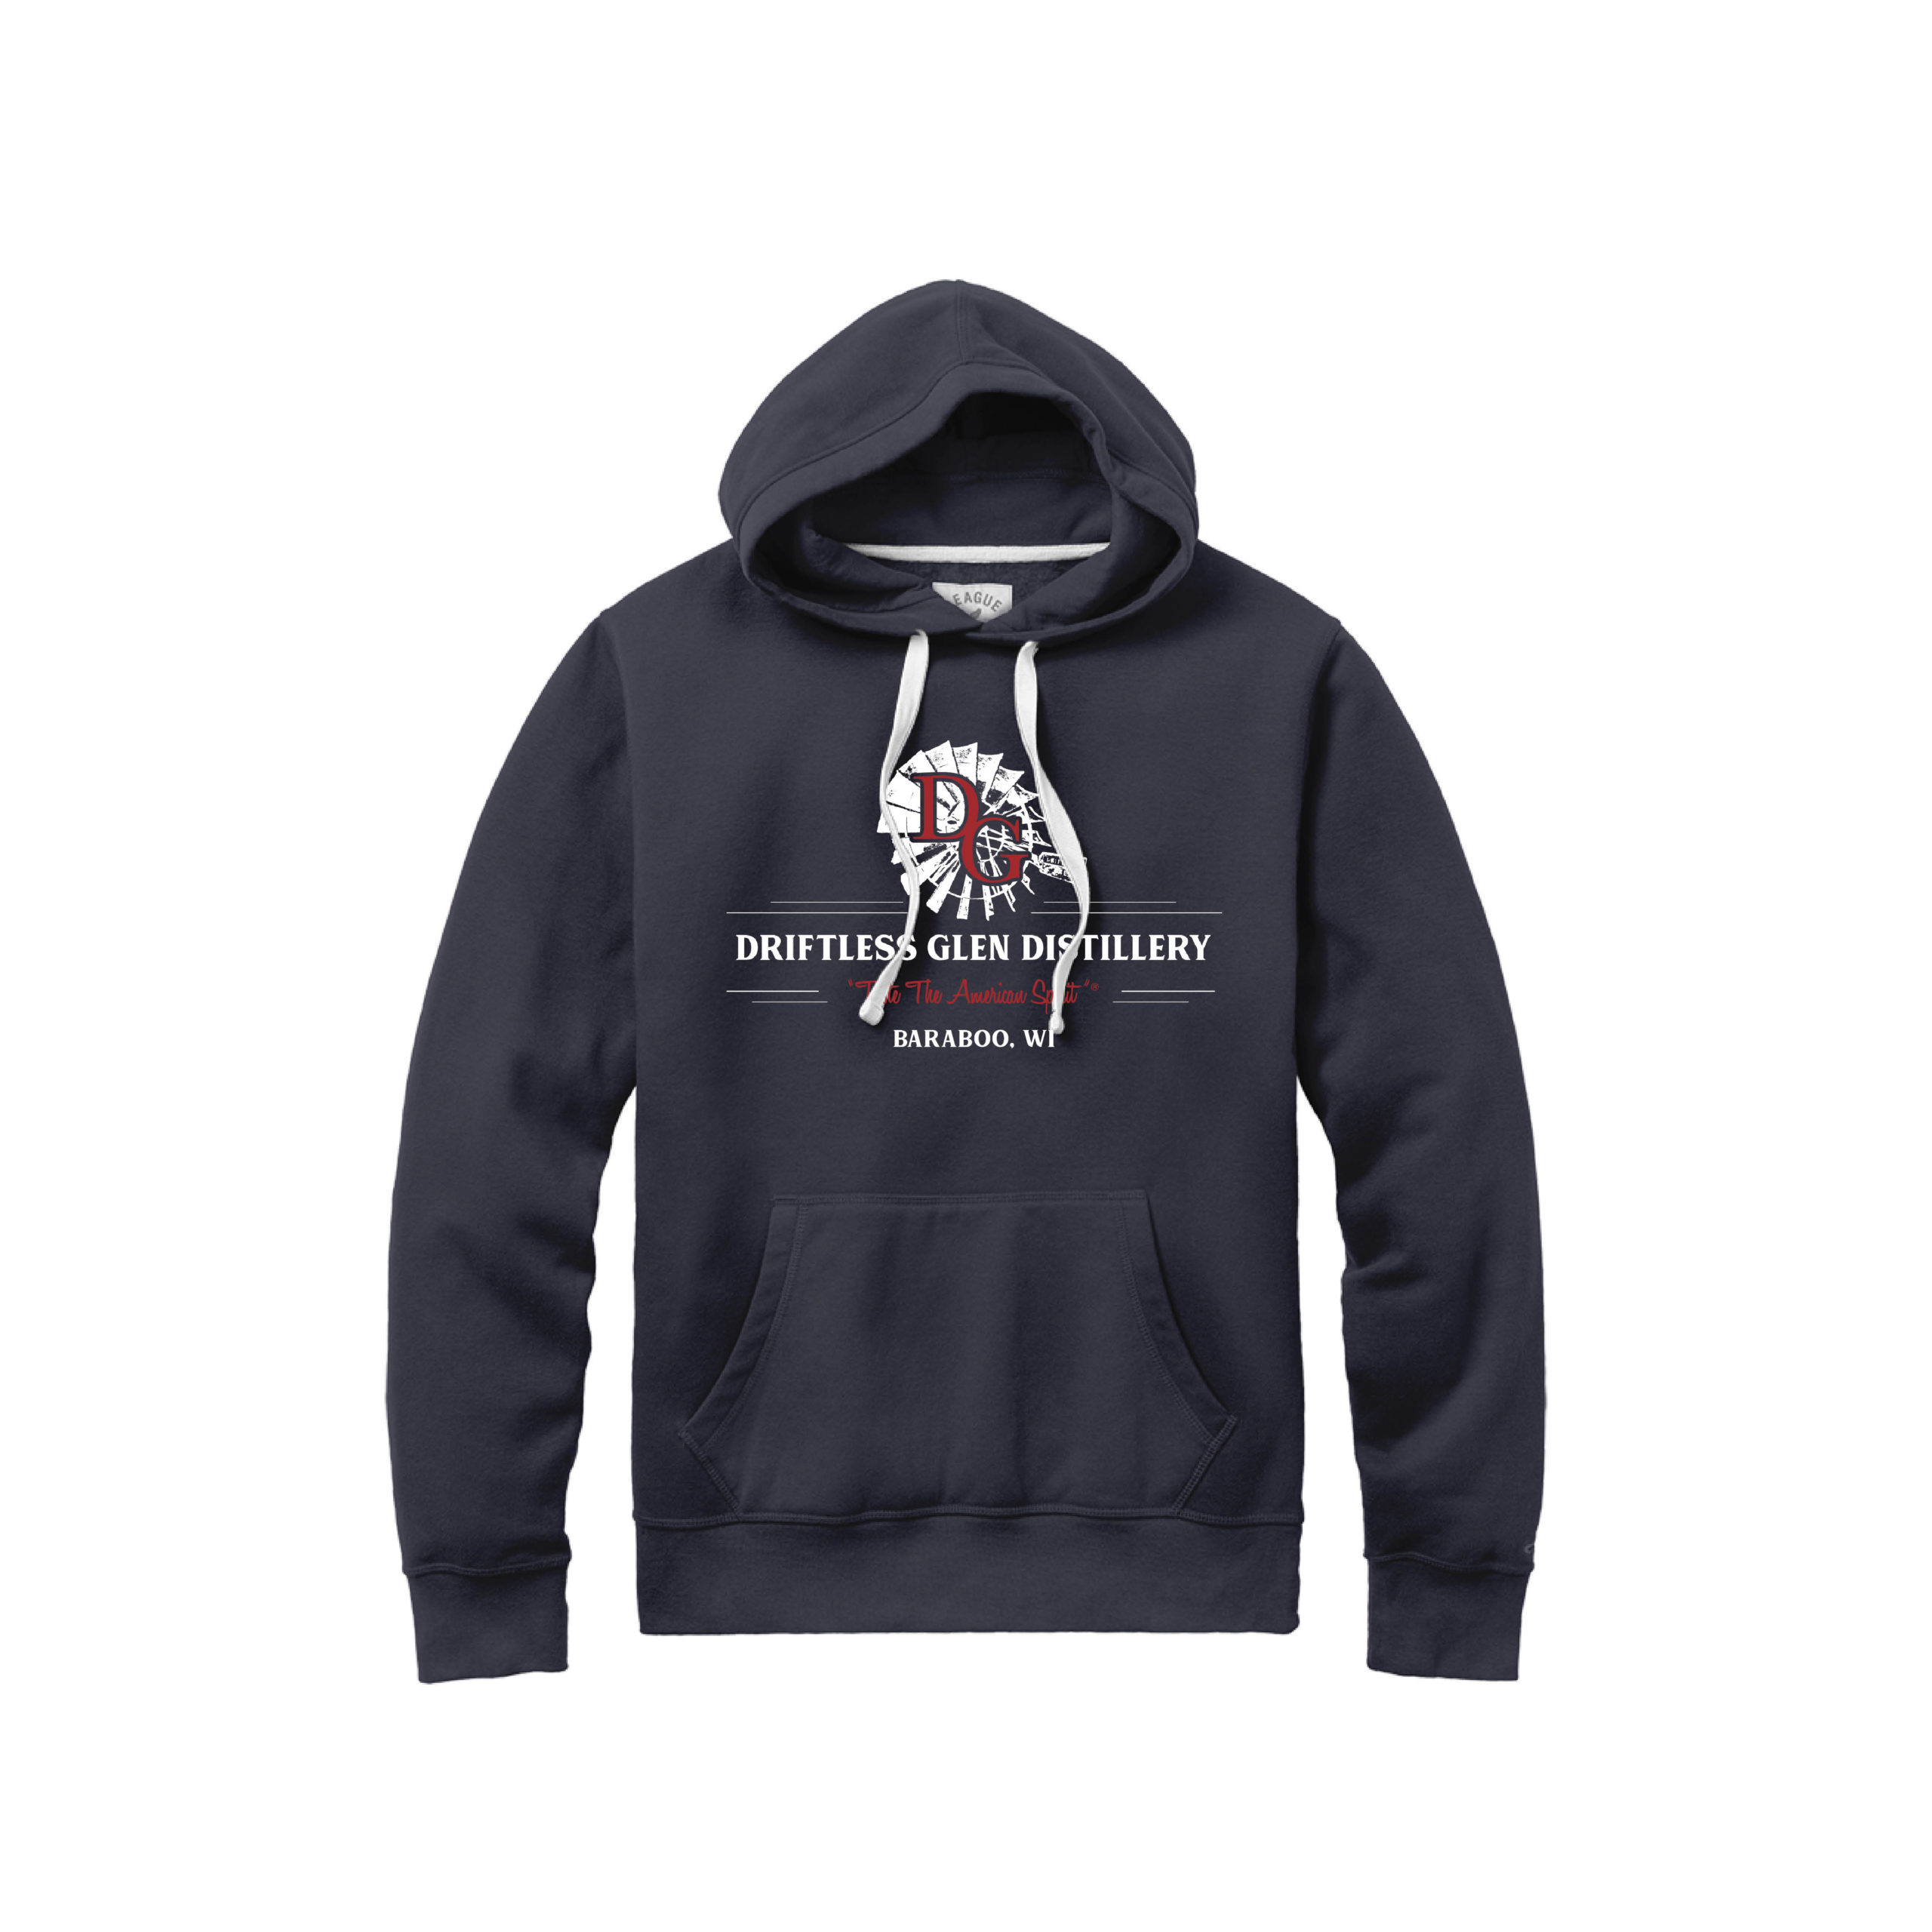 navy stadium hoodie with red and white logo on the front